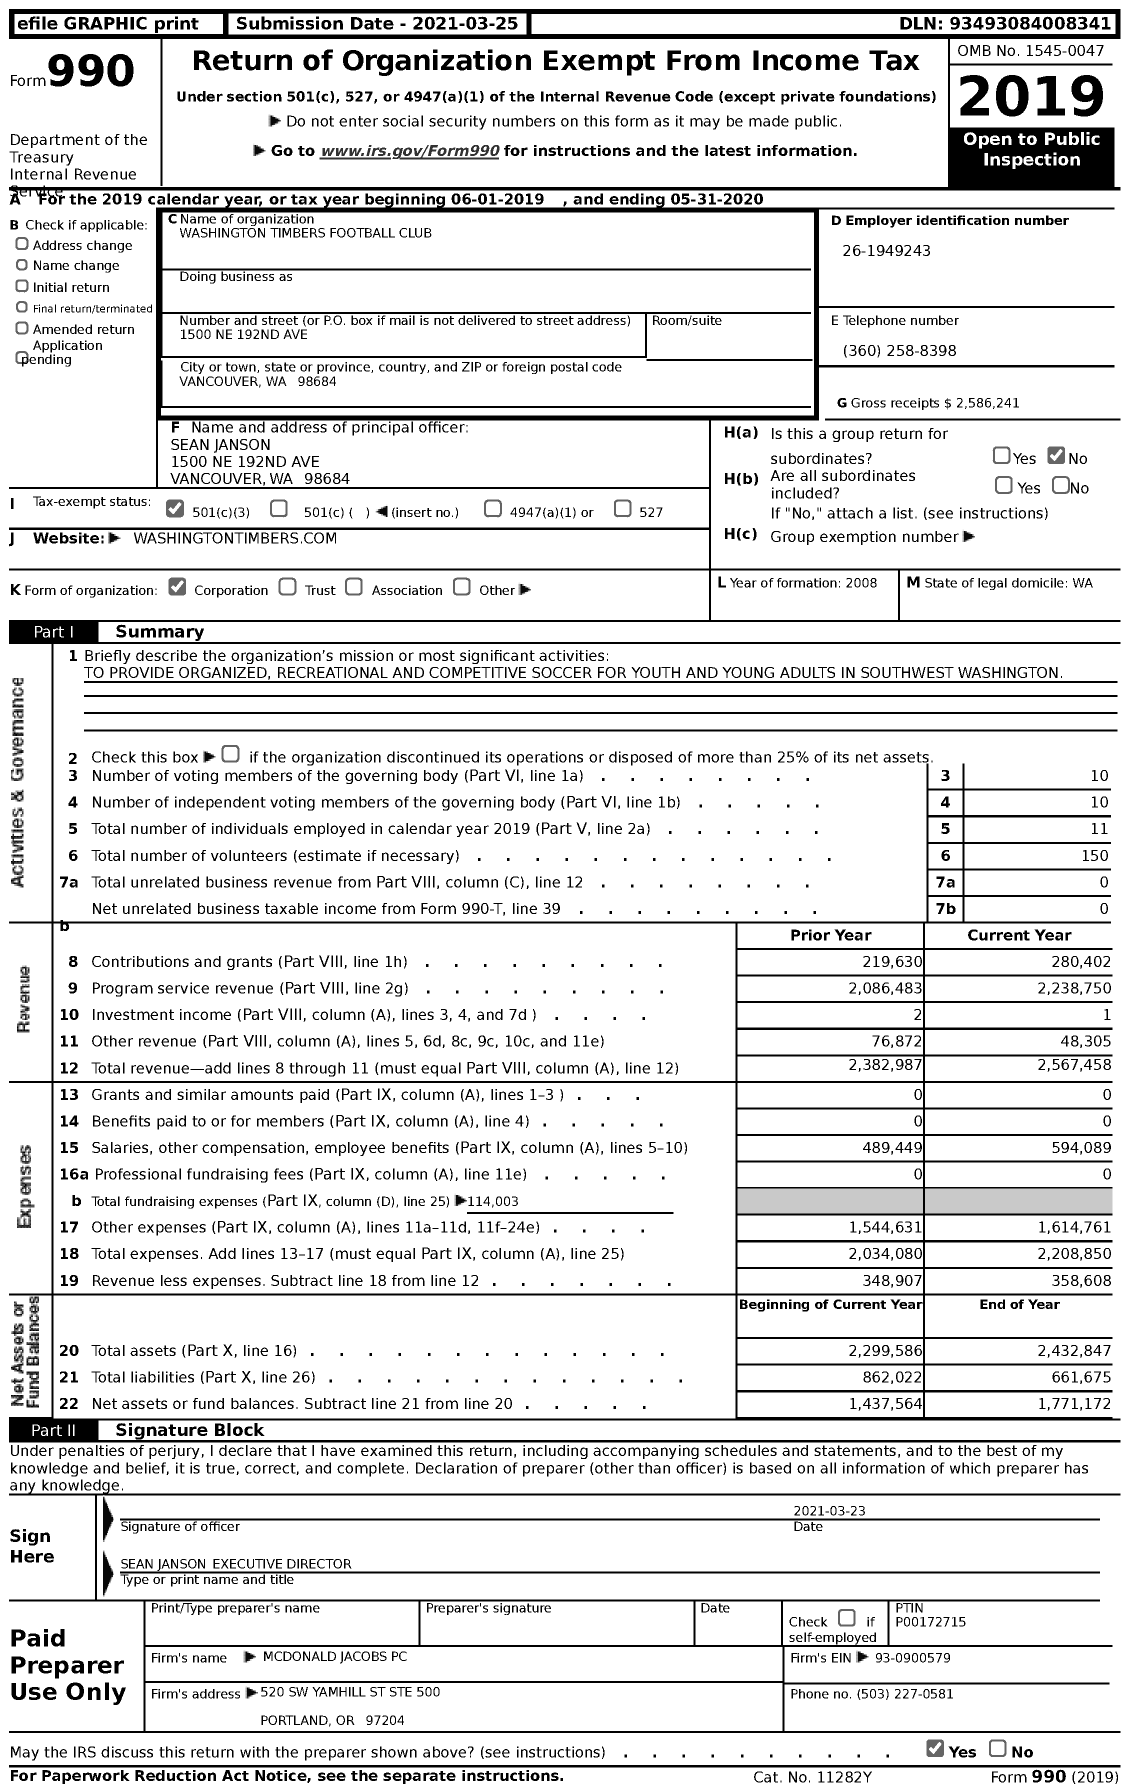 Image of first page of 2019 Form 990 for Washington Timbers Football Club